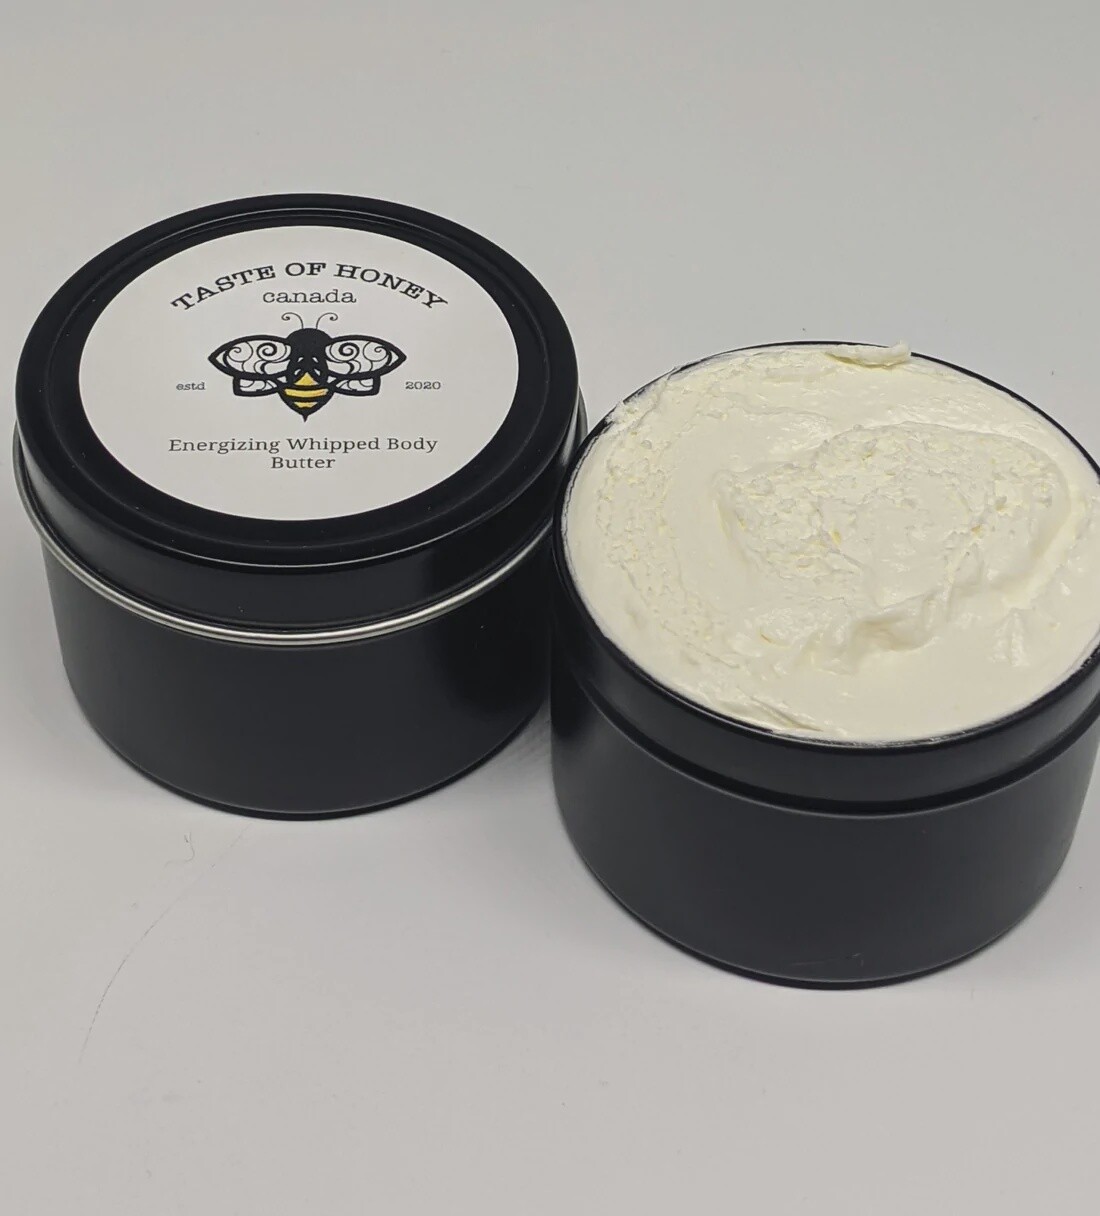 Energizing Whipped Body Butter